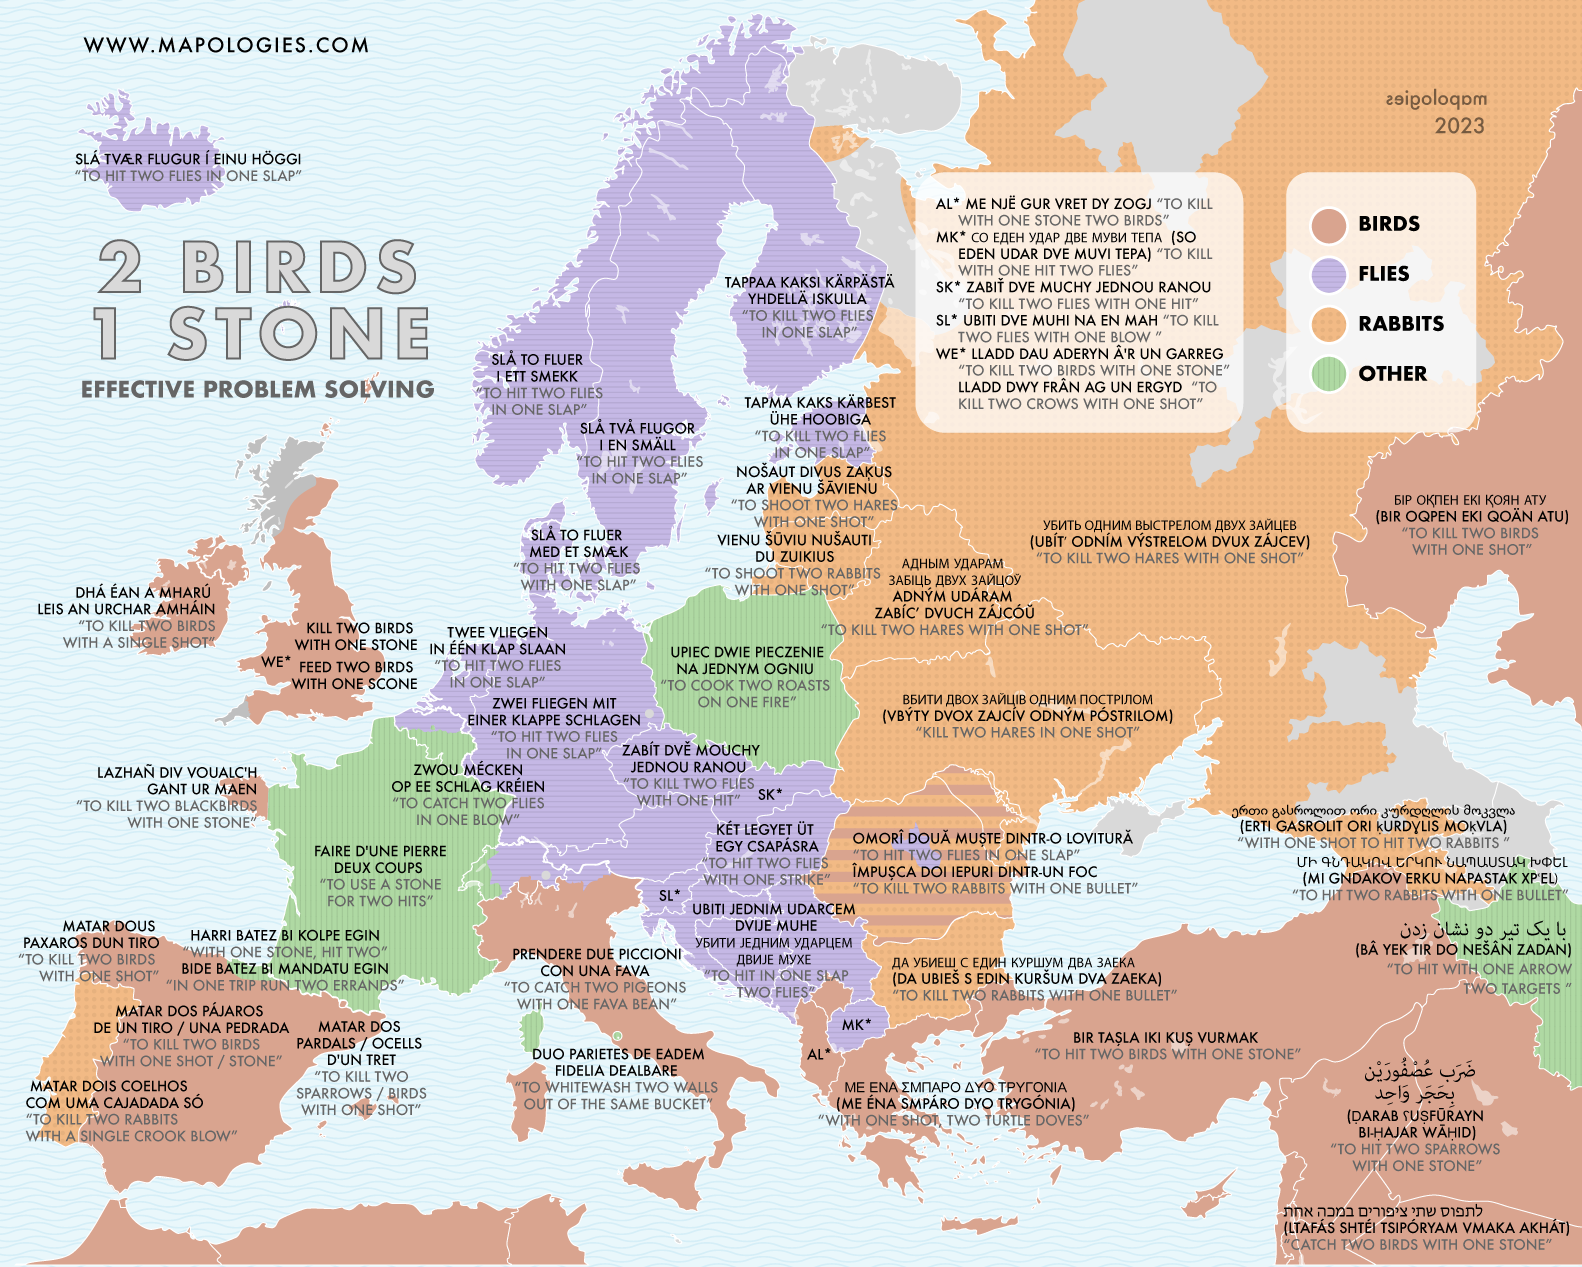 Mapping the idiom "To kill two birds with one stone" in different languages